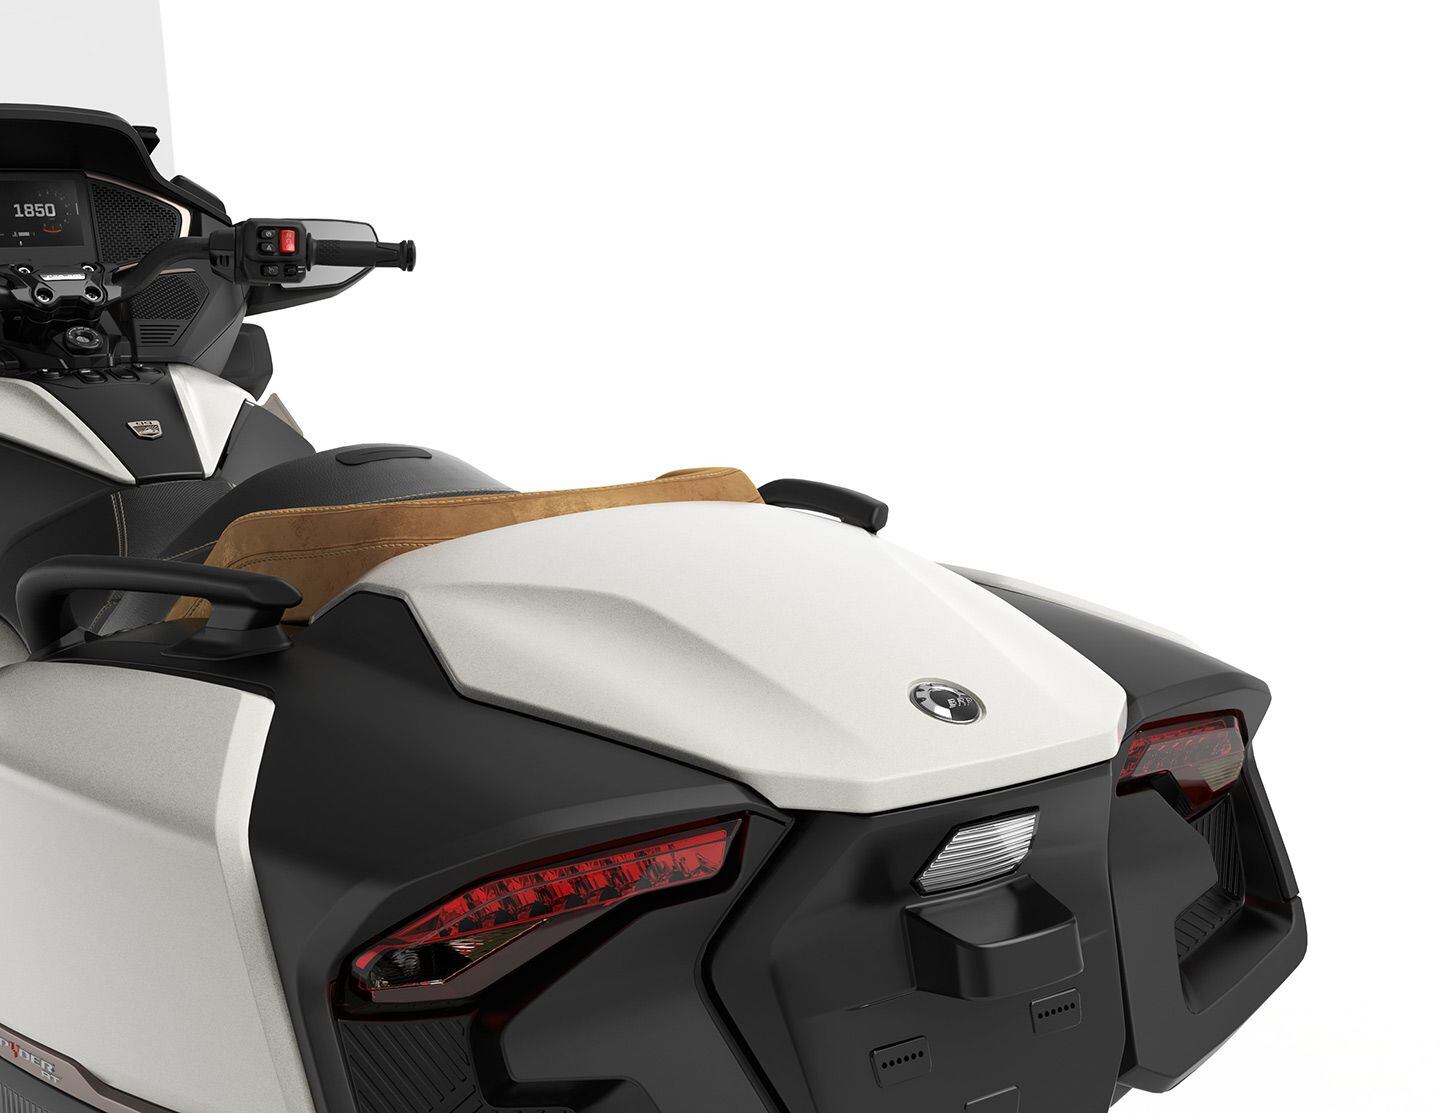 The Spyder RT Sea-to-Sky has plenty of storage space and can easily accommodate a Can-Am trailer.